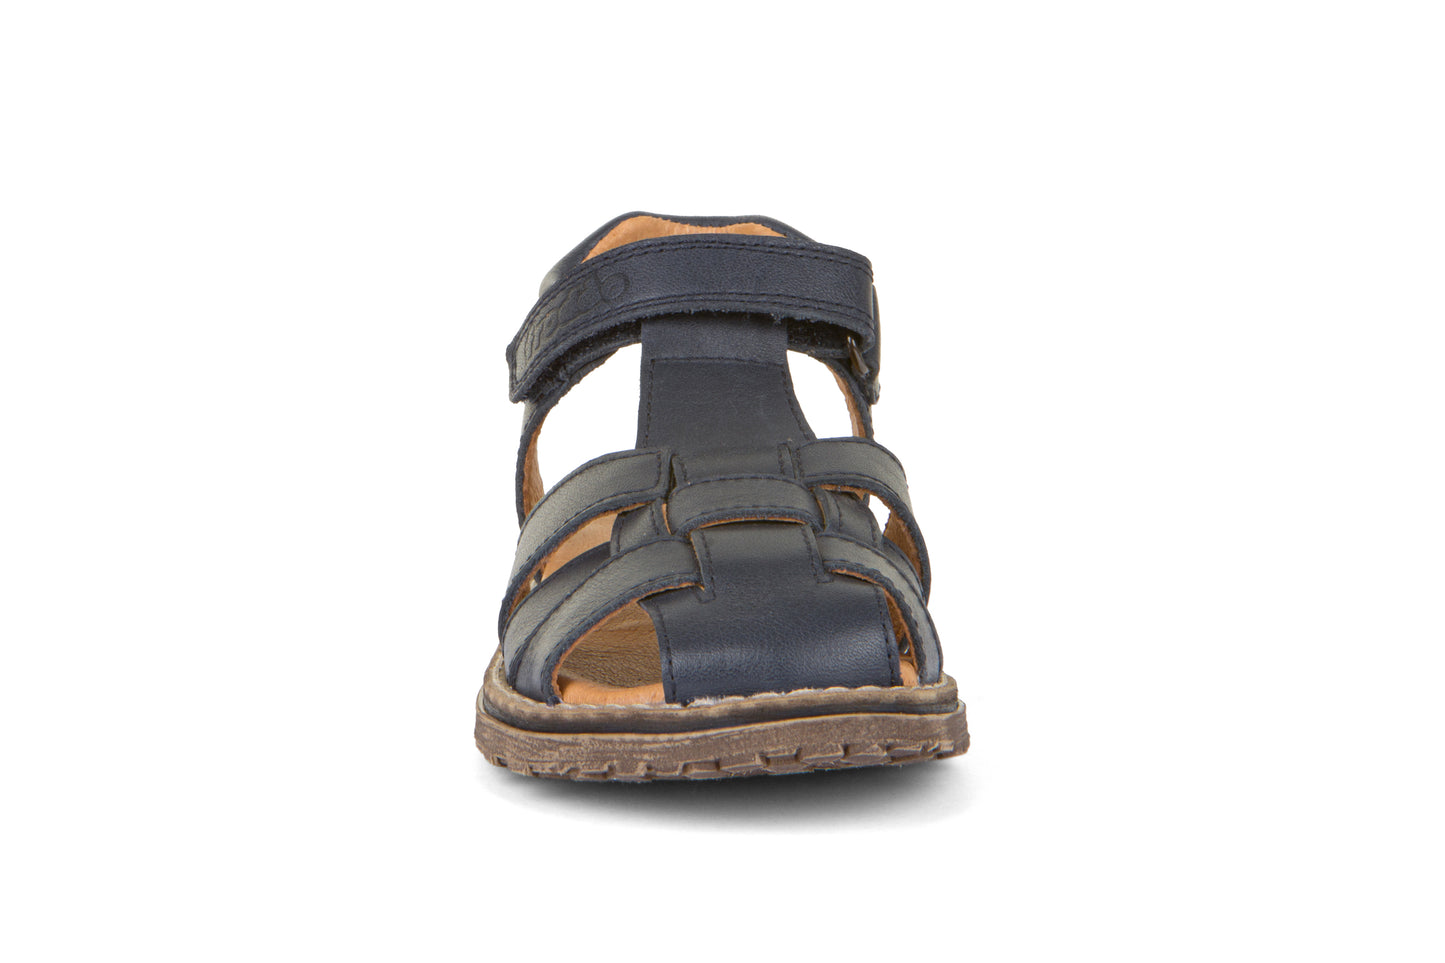 A boys sandal by Froddo, style G31500233 Daros, in navy , velcro fastening. Front view.